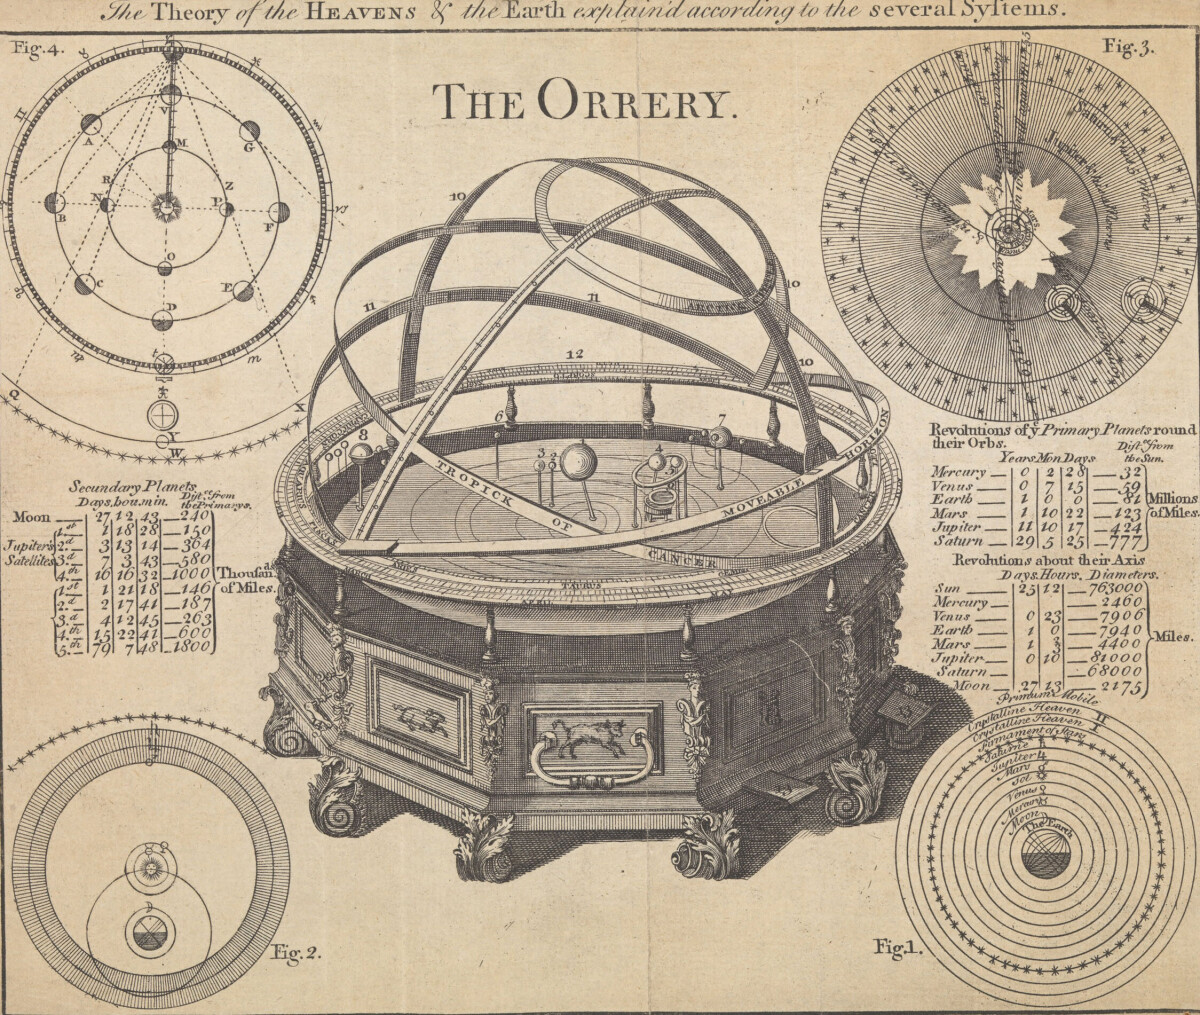 The Orrery, engraving by John Hinton, 1749